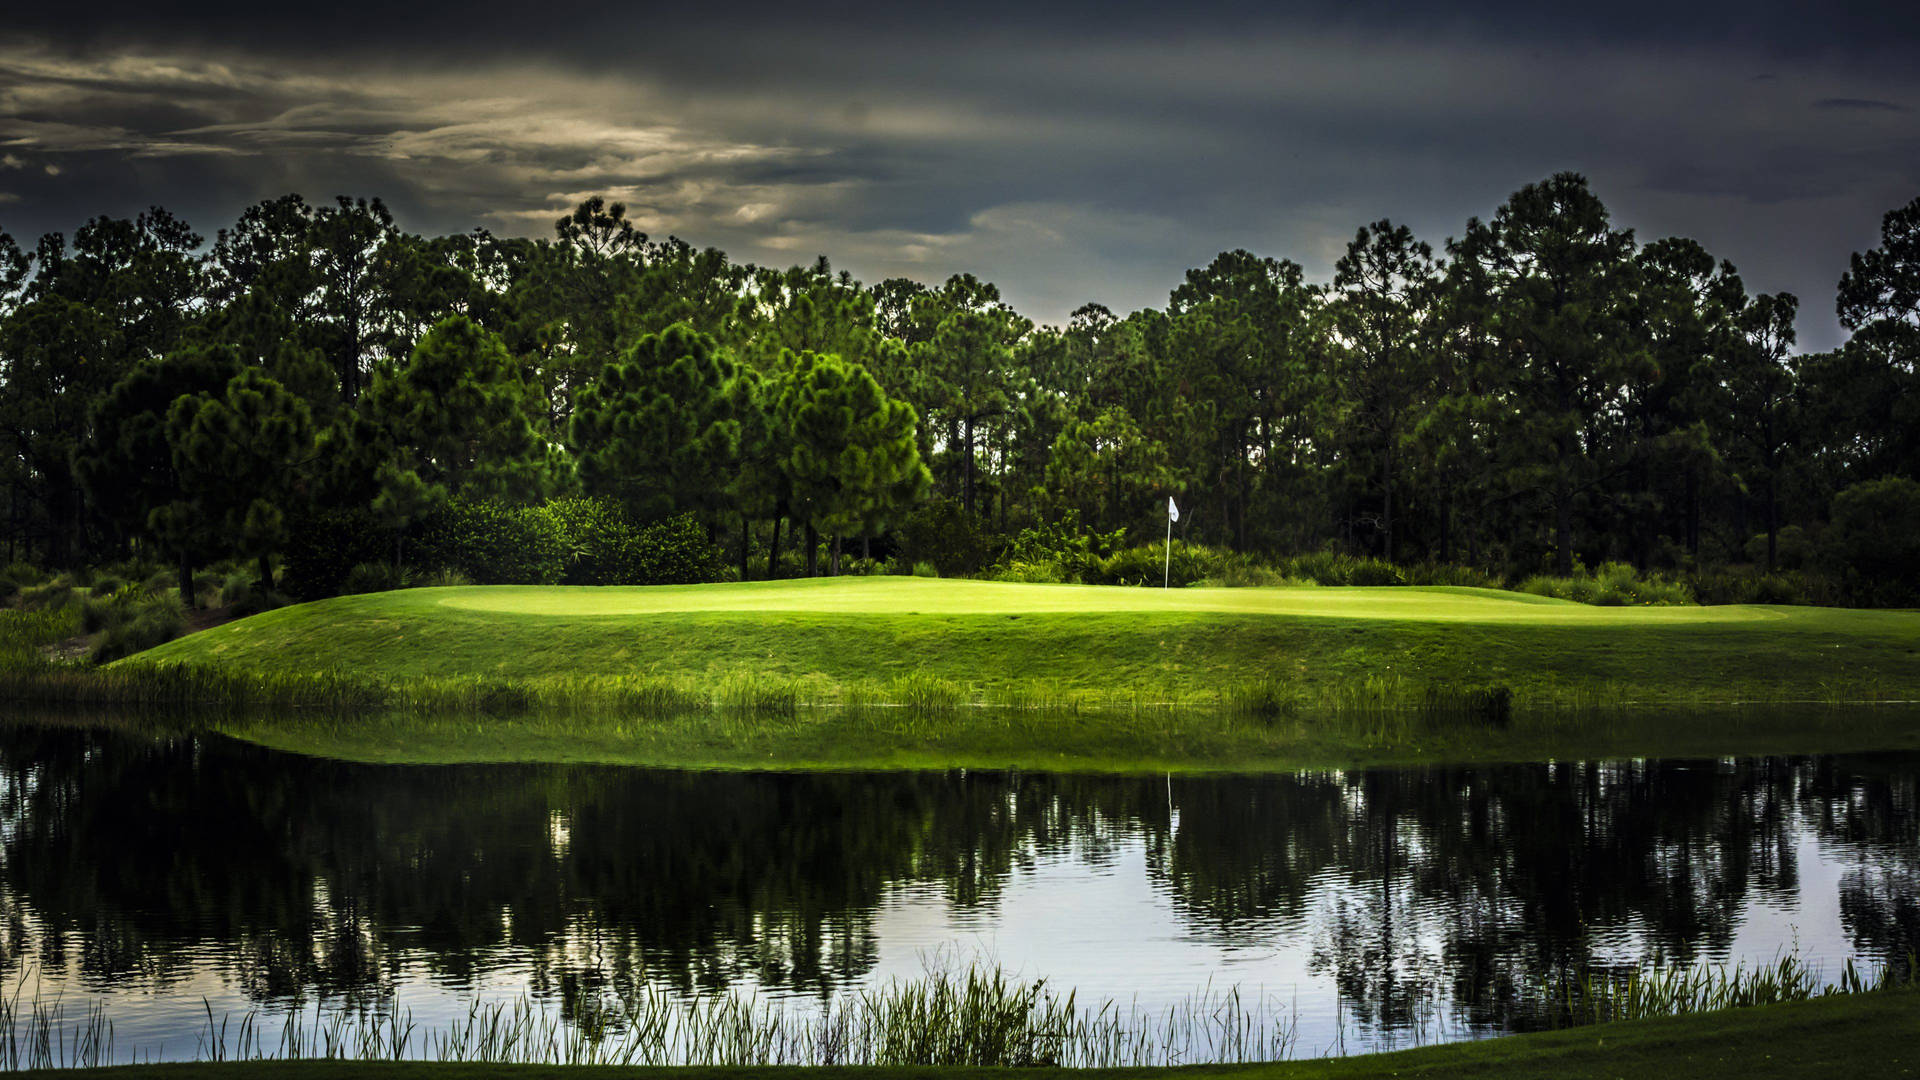 4k Golf Course Gloomy Day Wallpaper